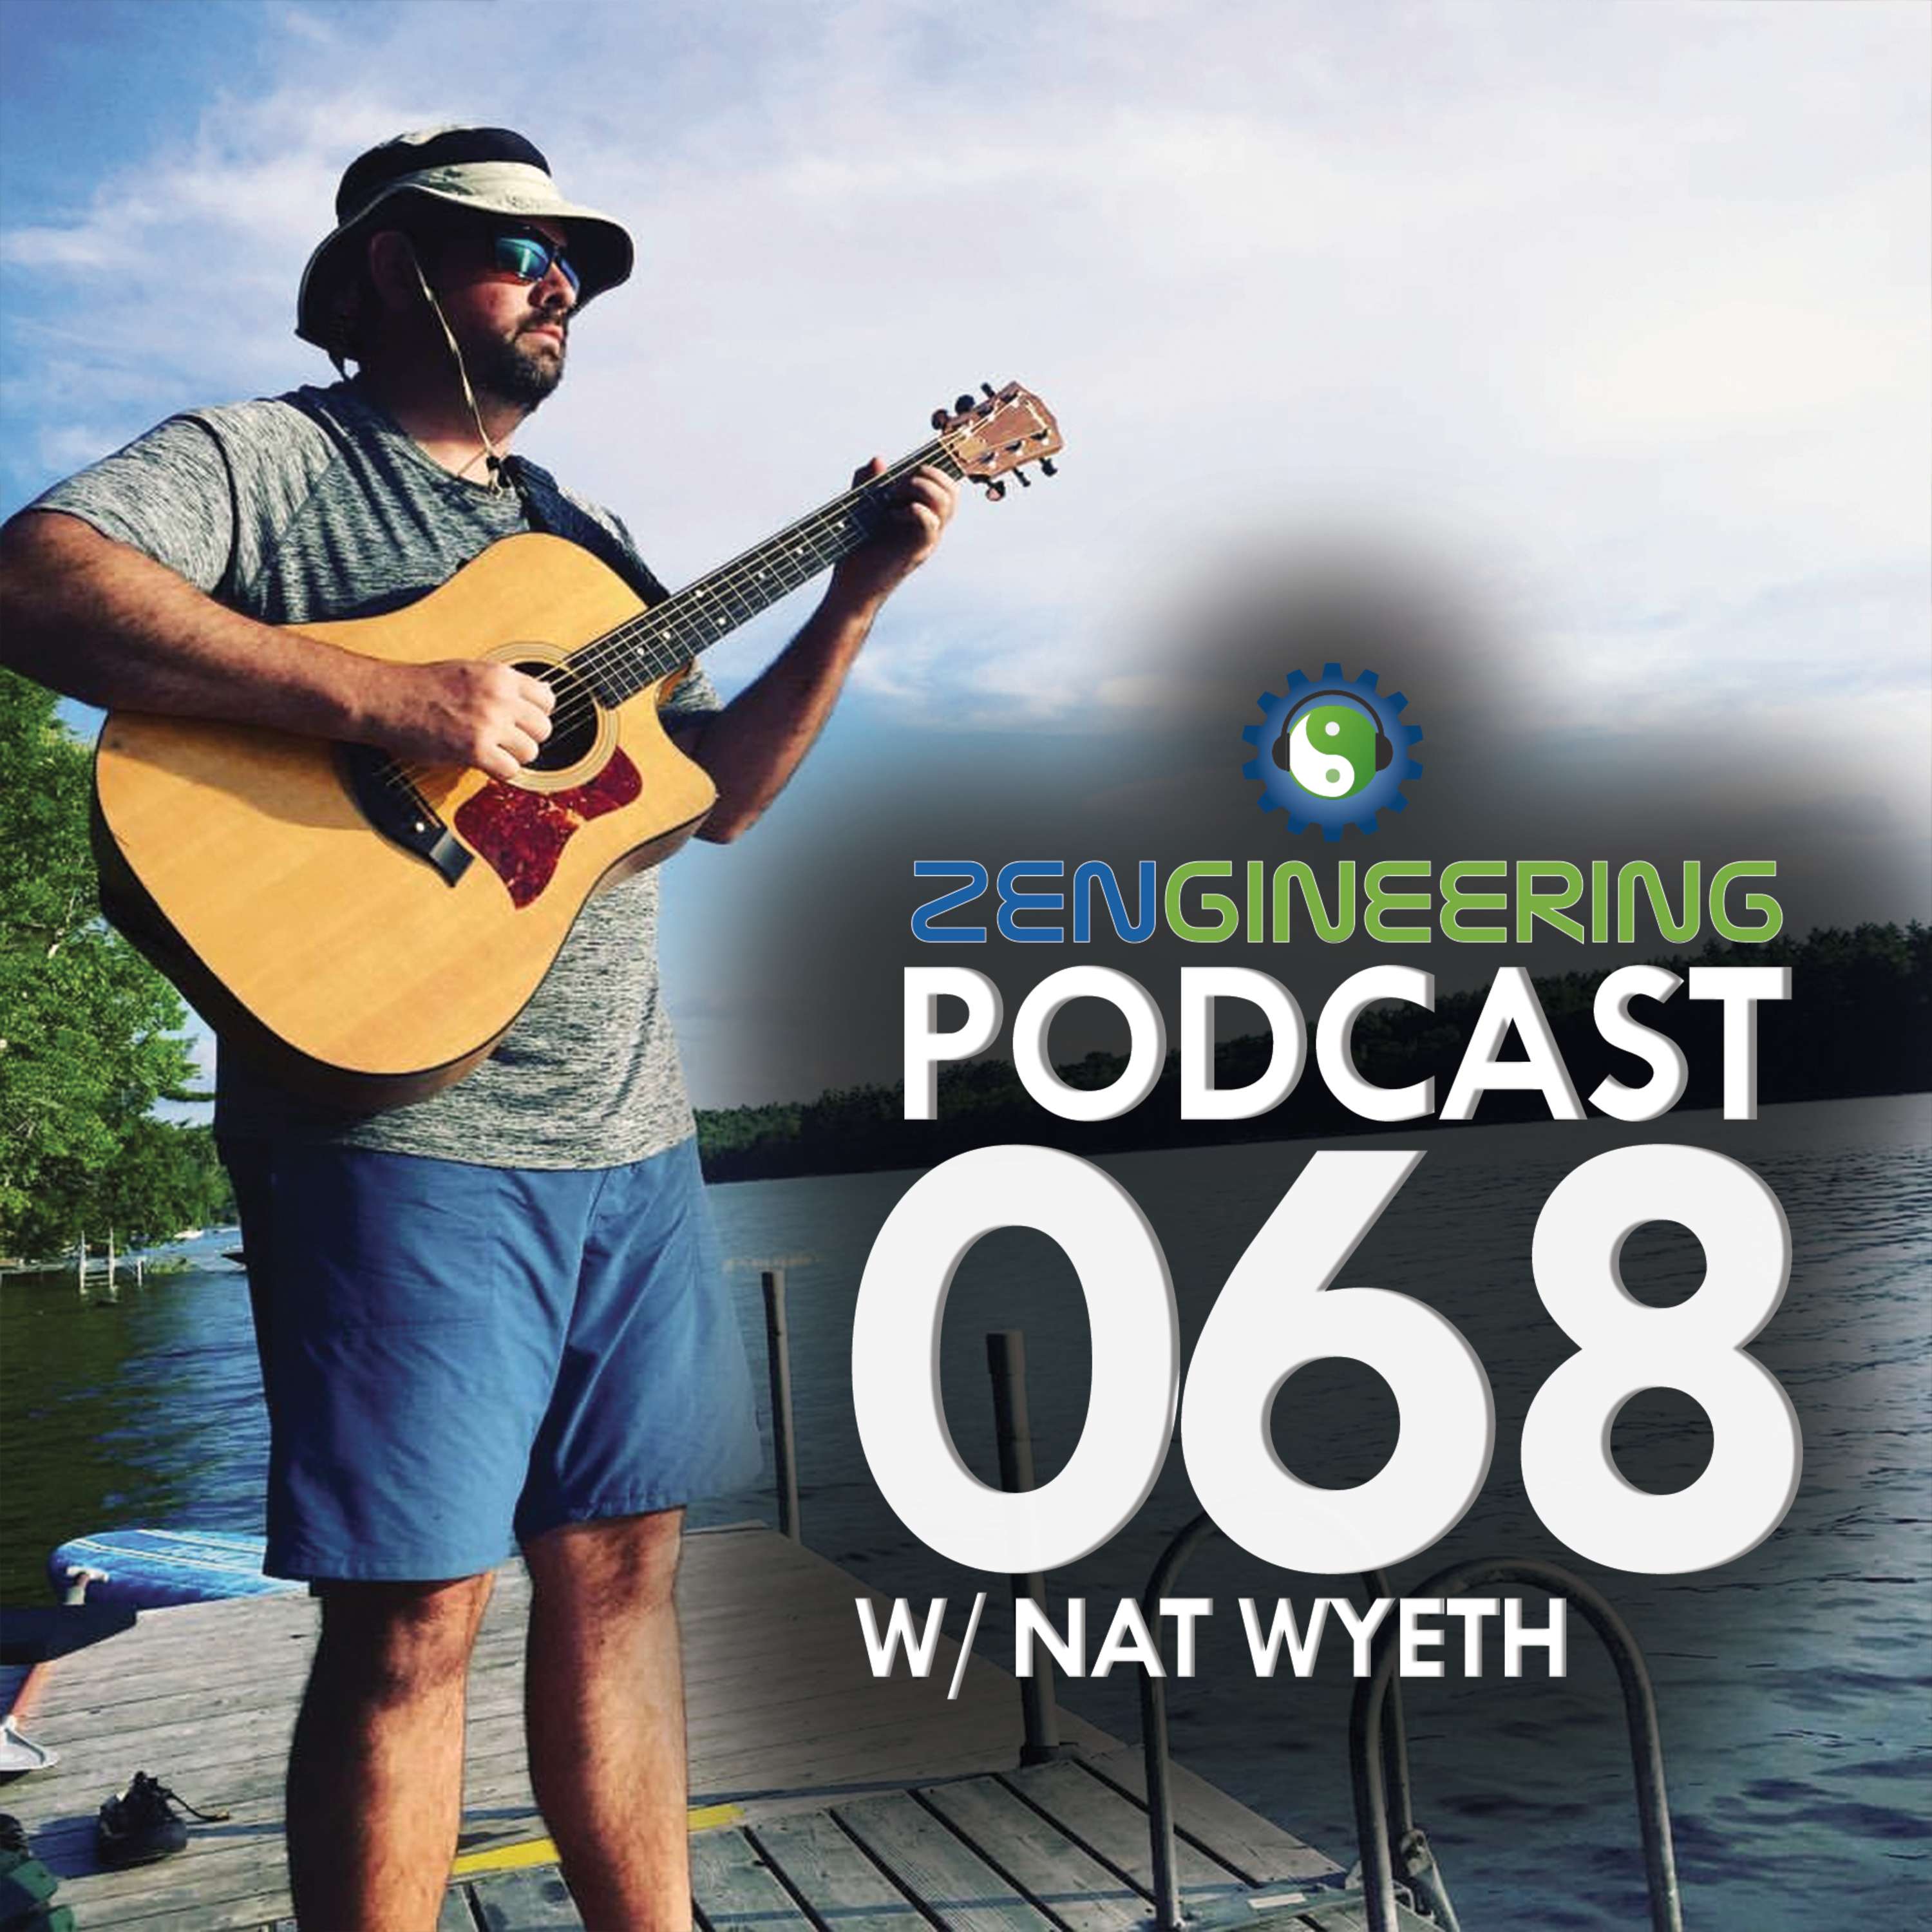 068 - with Nat Wyeth - On Fundraising and The Practice of Giving